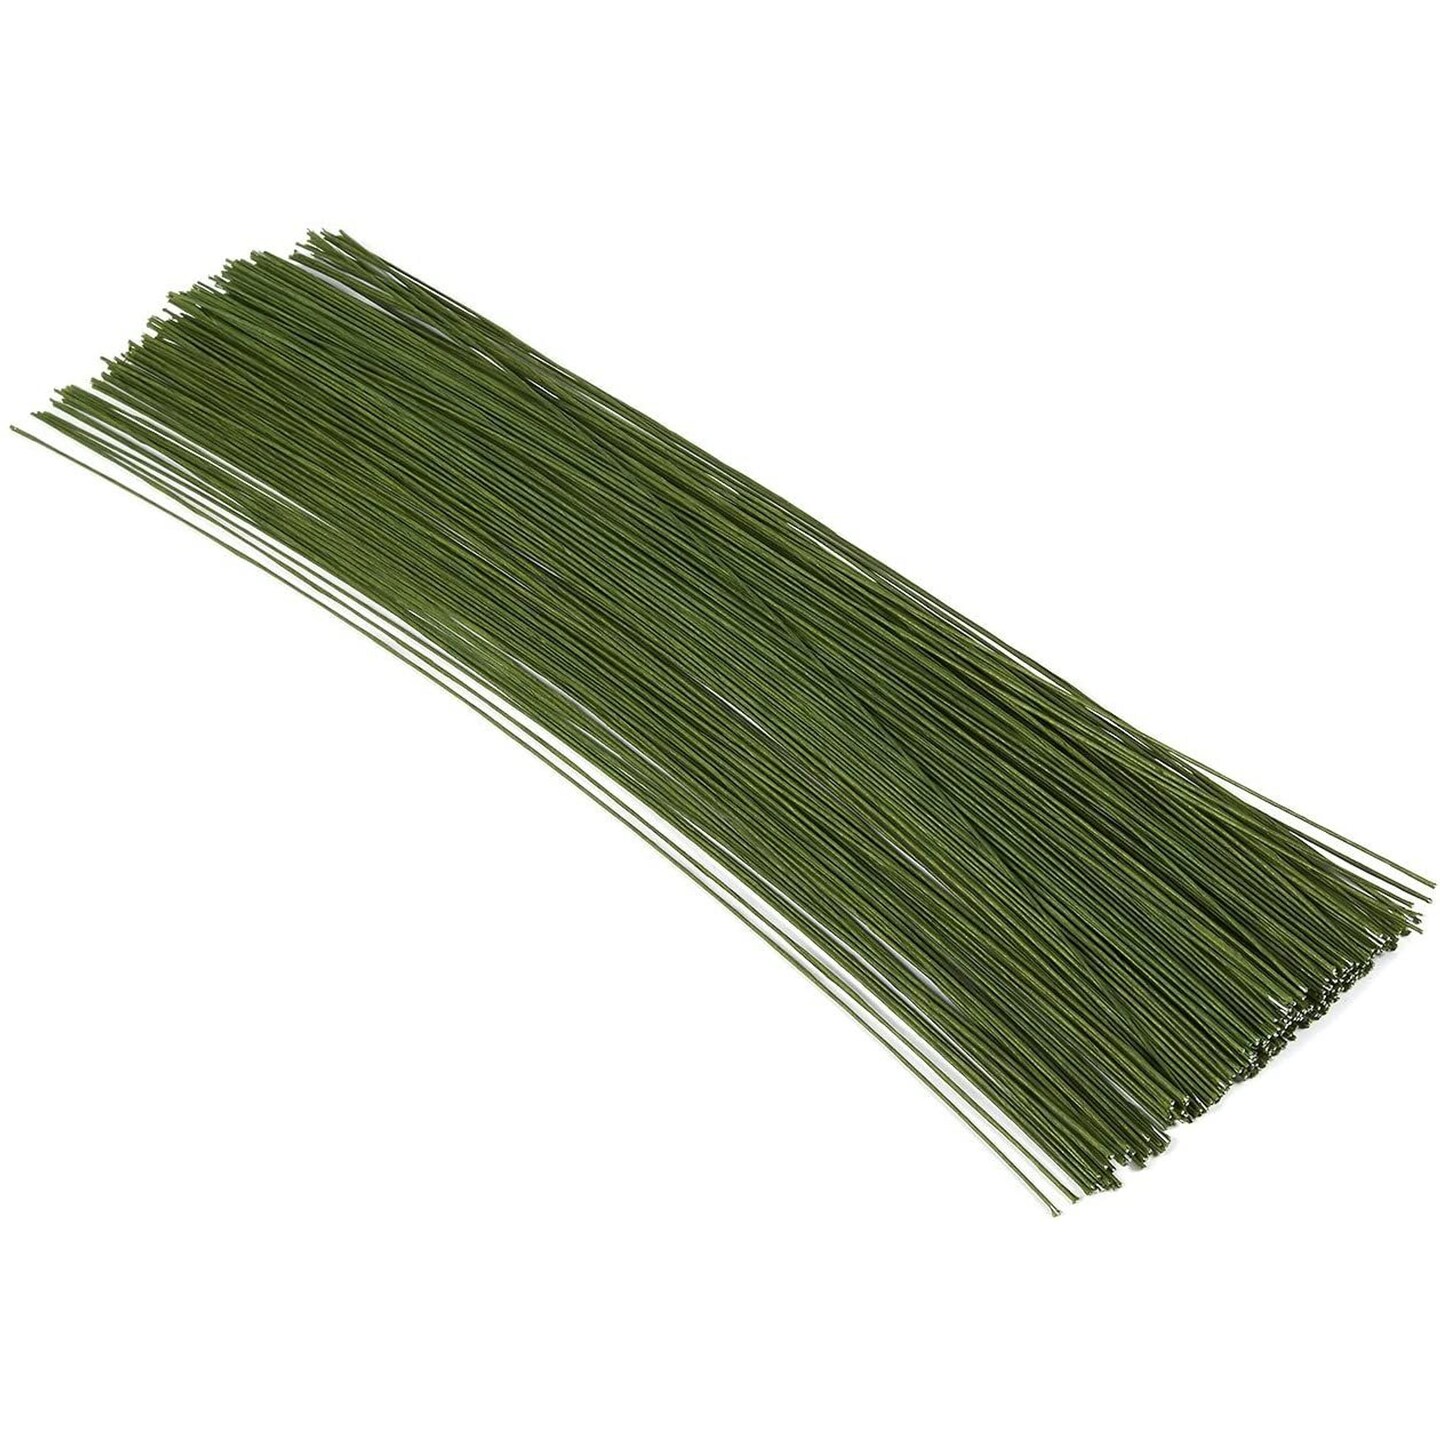 200 Pieces 19 Gauge Dark Green Floral Stem Wire for DIY Crafts, 16 In Paper Wrapped Wire for Artificial Flower Arrangements